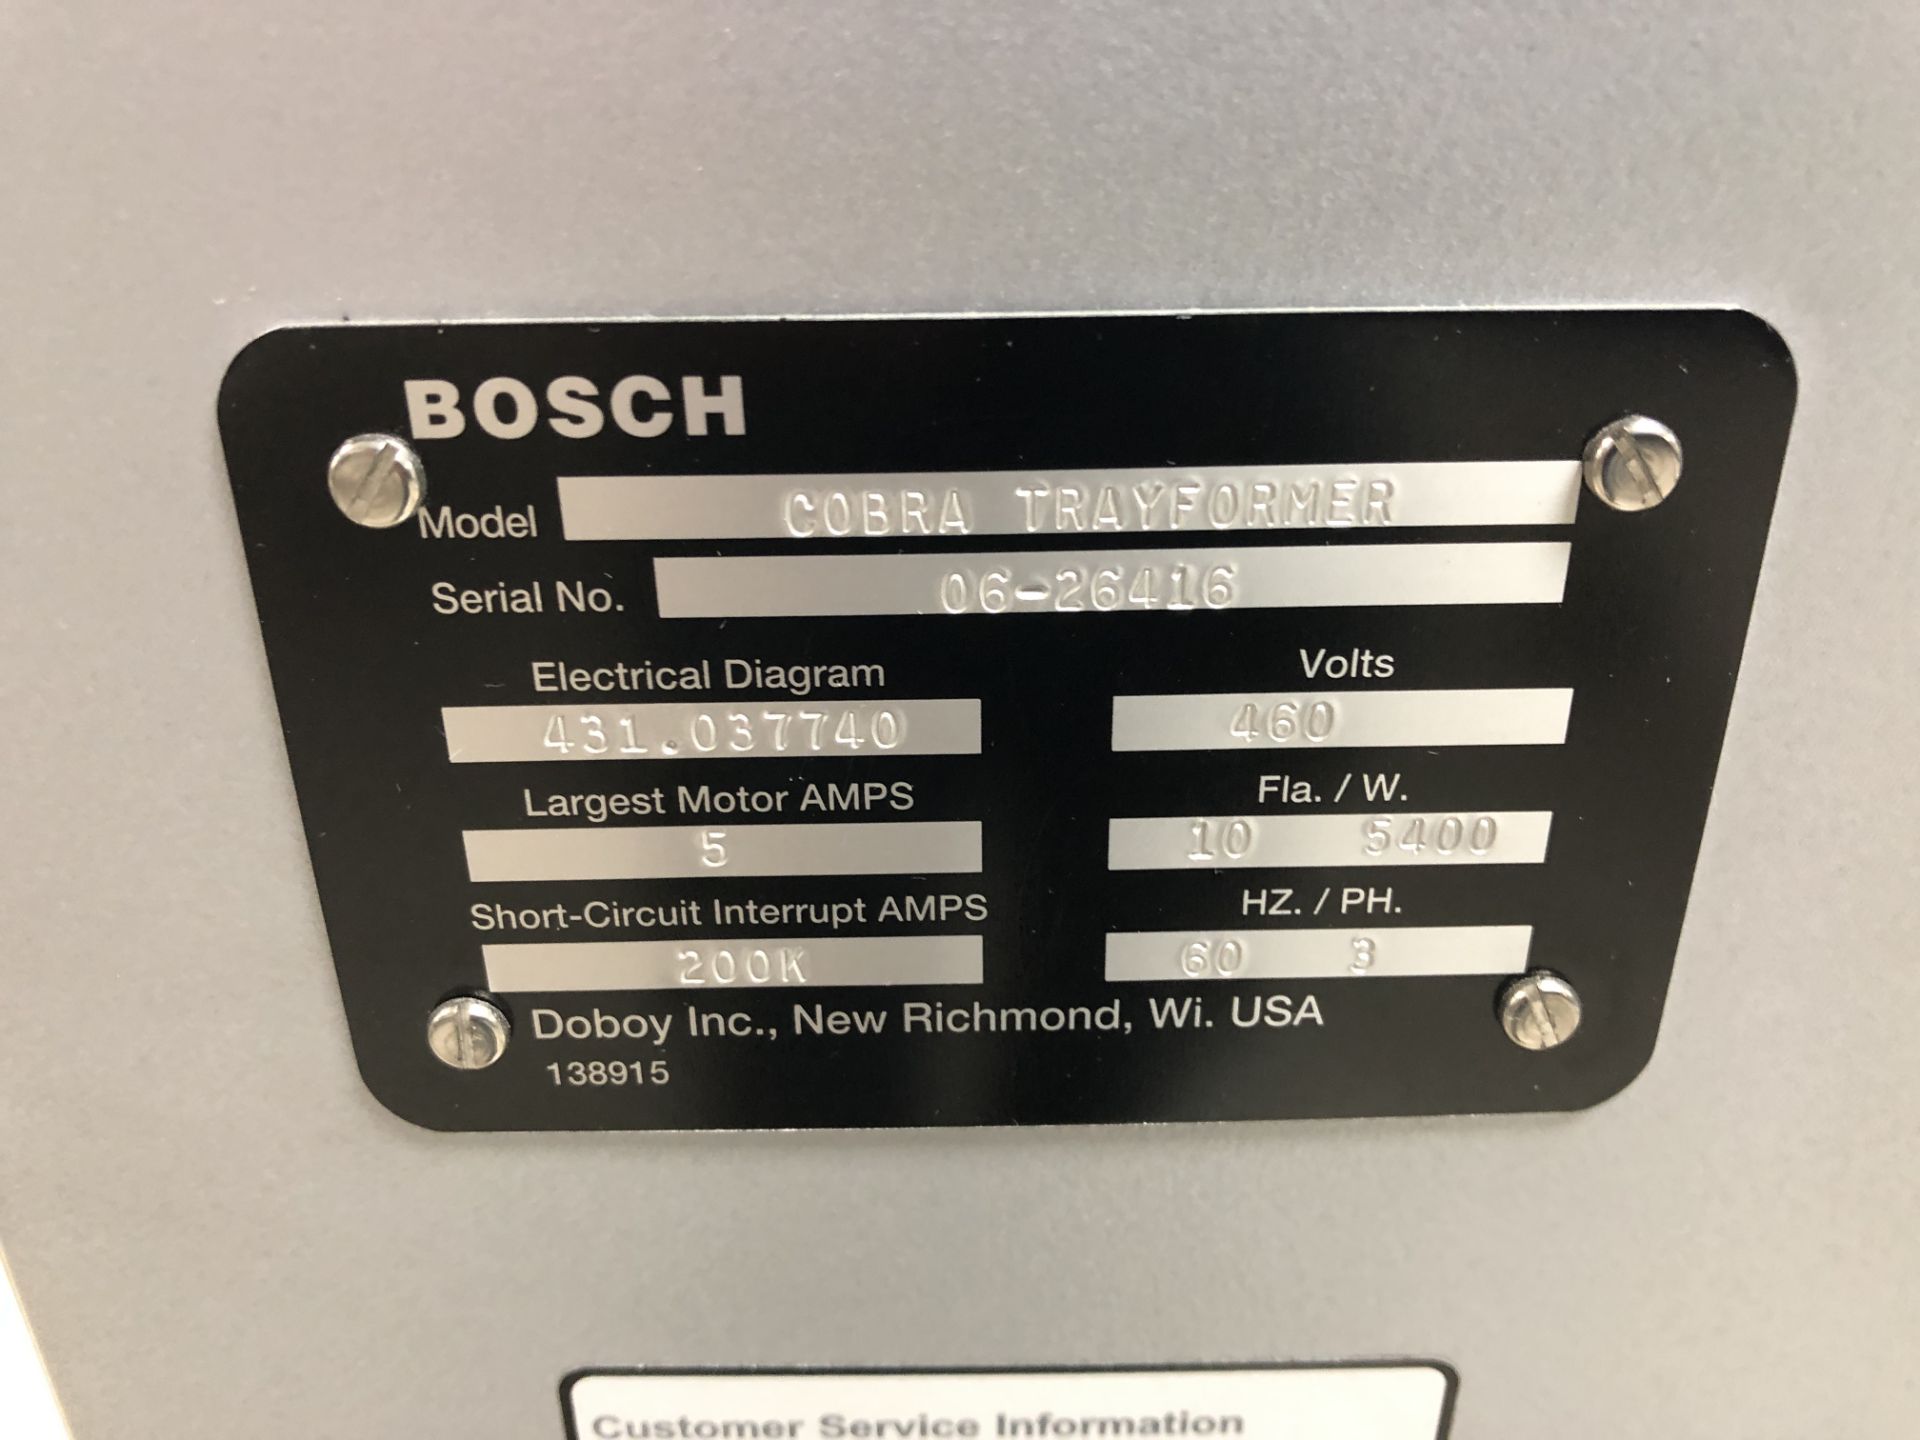 Bosch Doboy Cobra Carton Former with Nordson Hot melt Unit, serial#06-24616 with tooling built - Image 8 of 15